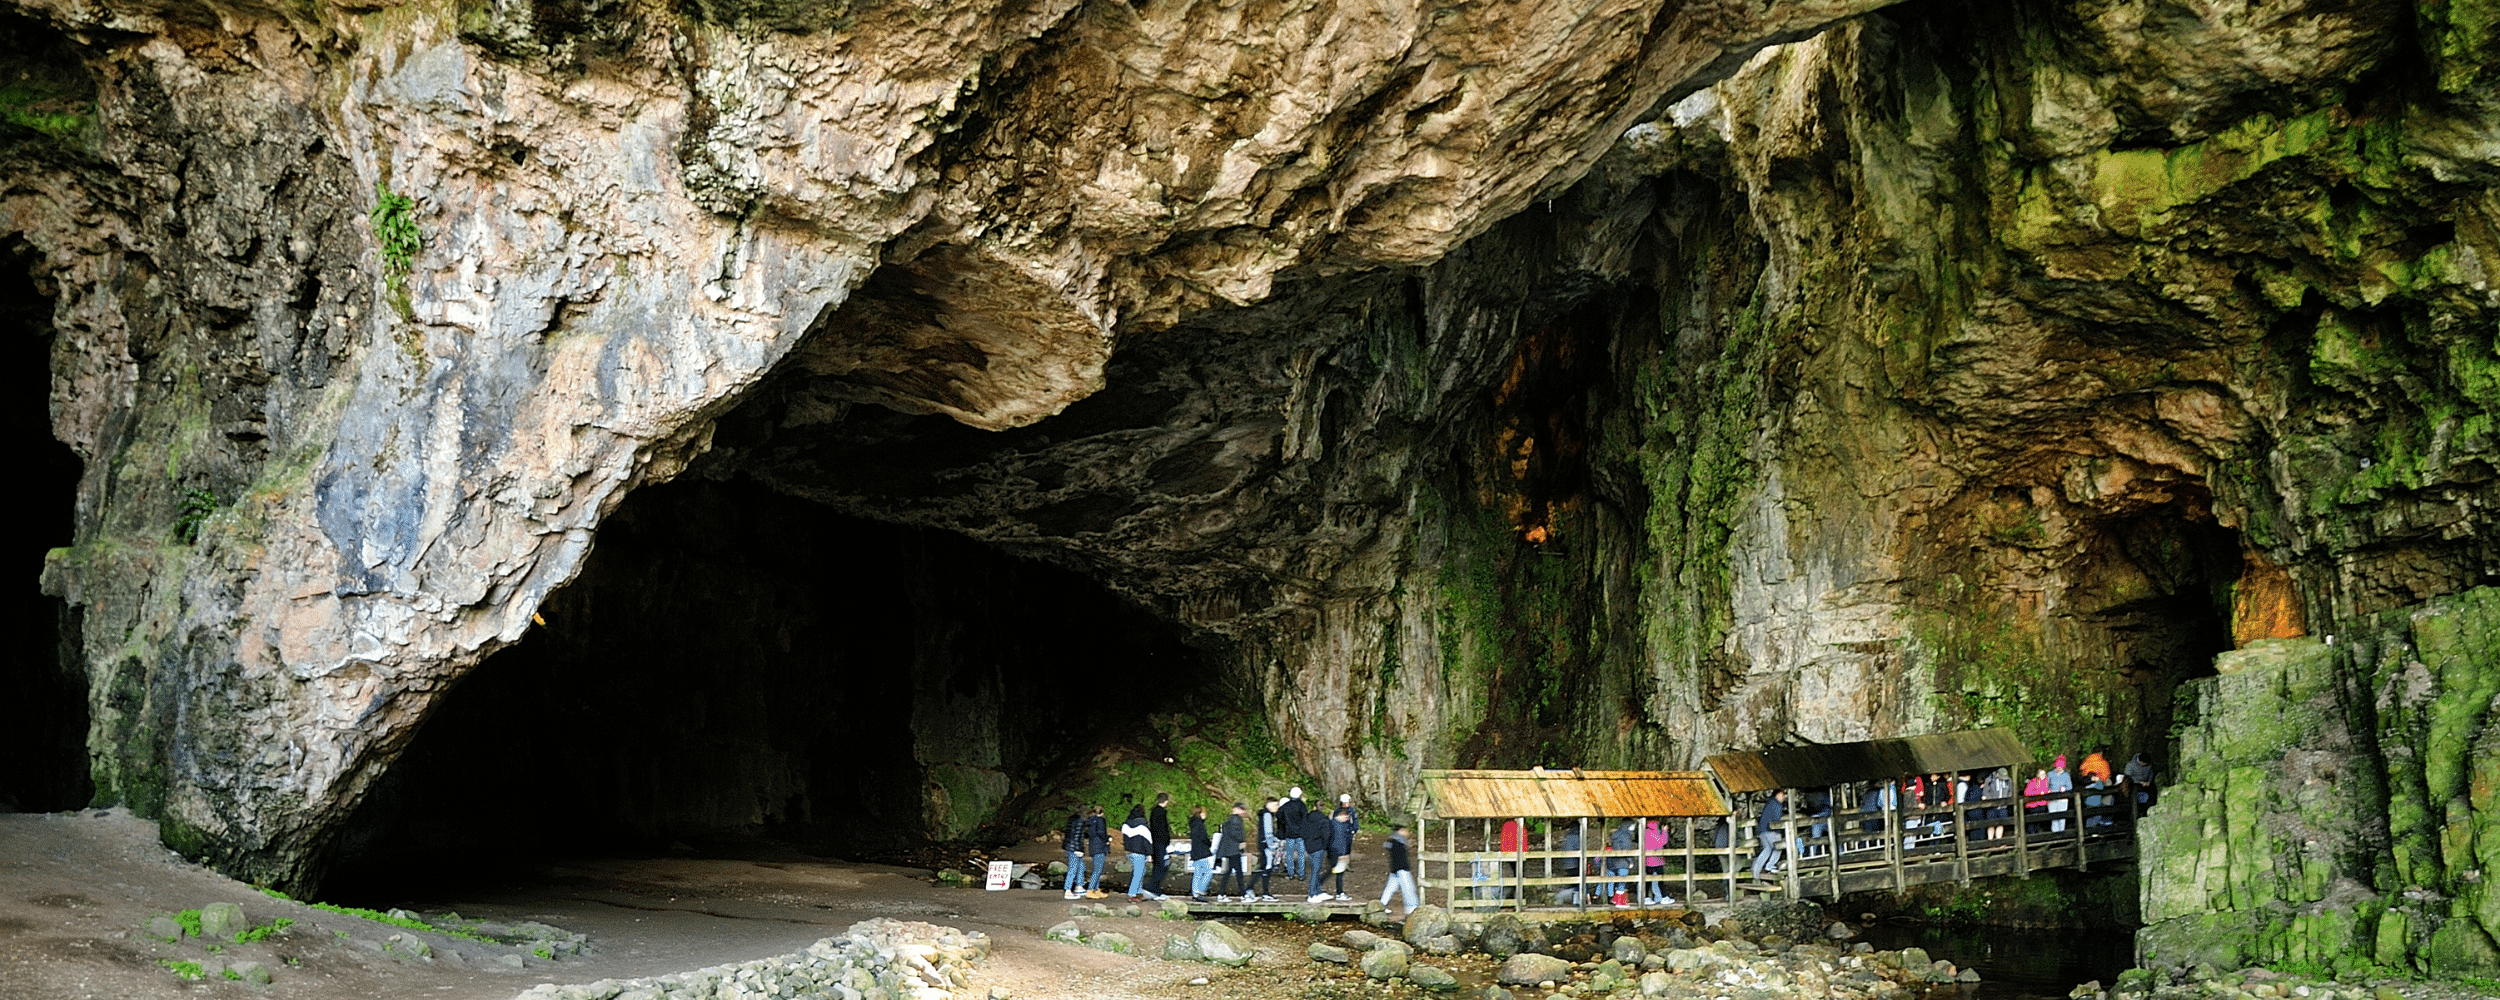 people standing in queue at the entrance of smoo cave